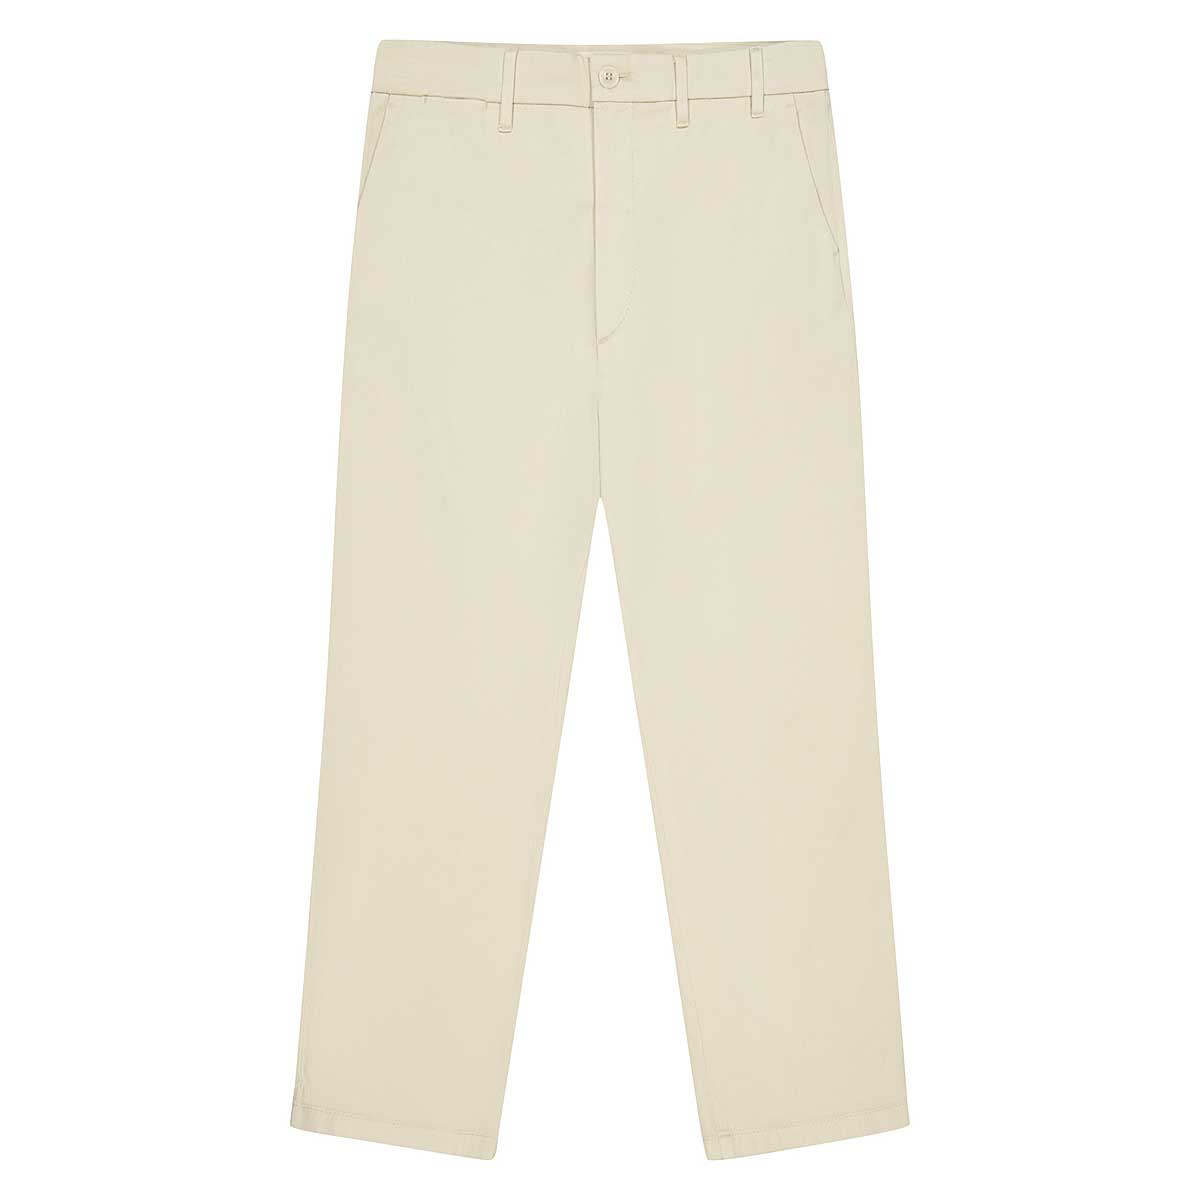 Norse Projects Aros Regular Light Stretch Pants, Oatmeal